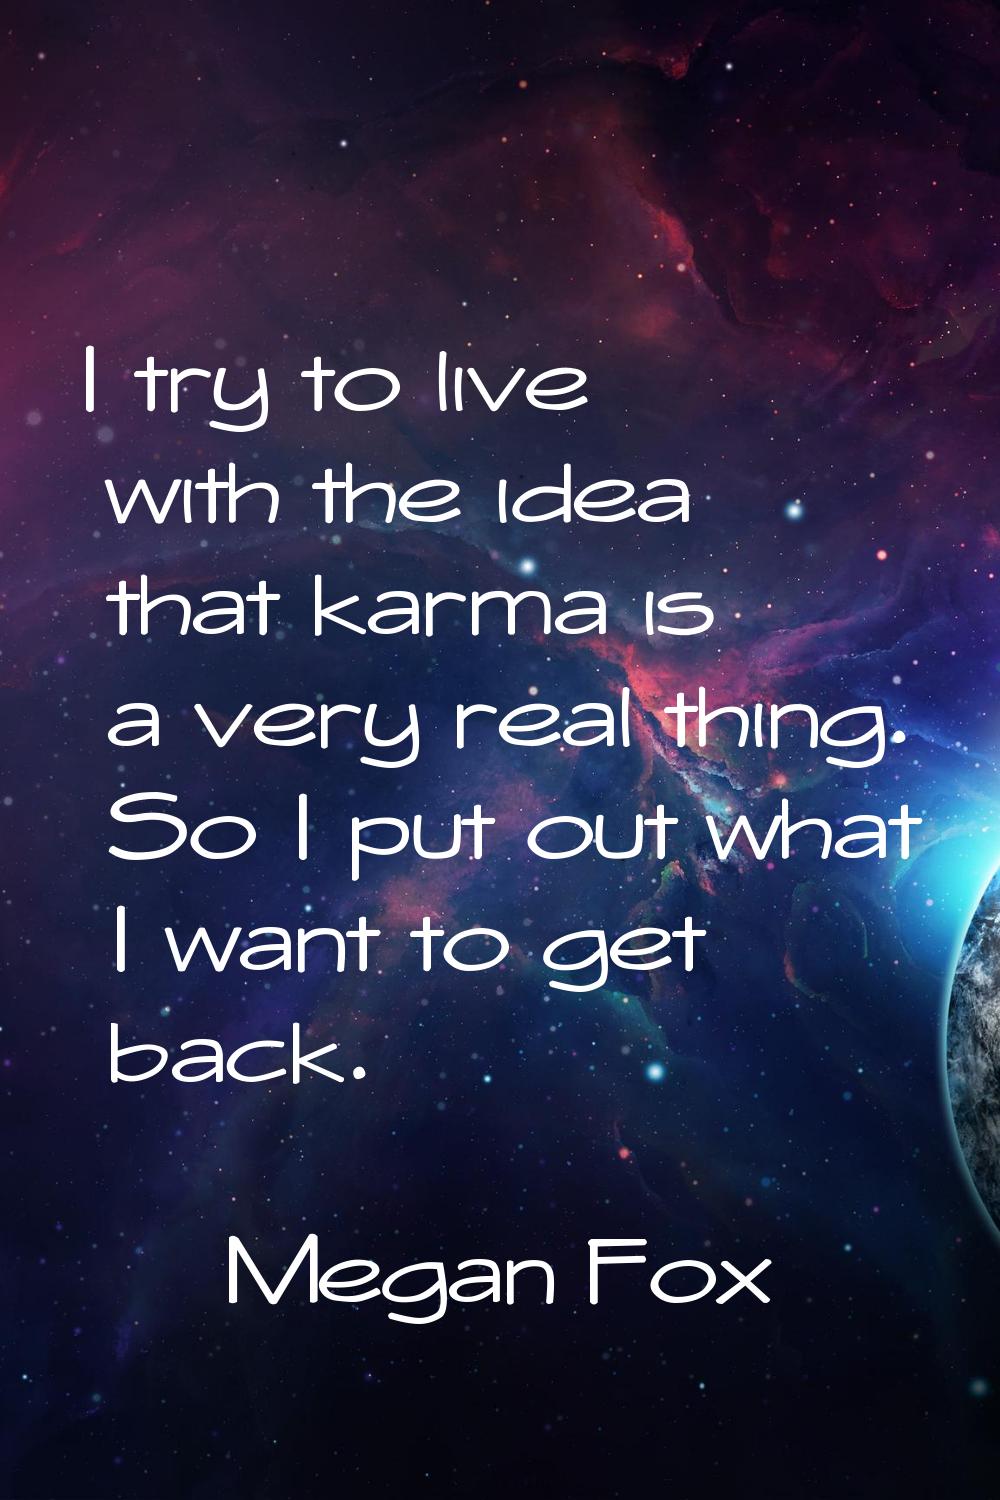 I try to live with the idea that karma is a very real thing. So I put out what I want to get back.